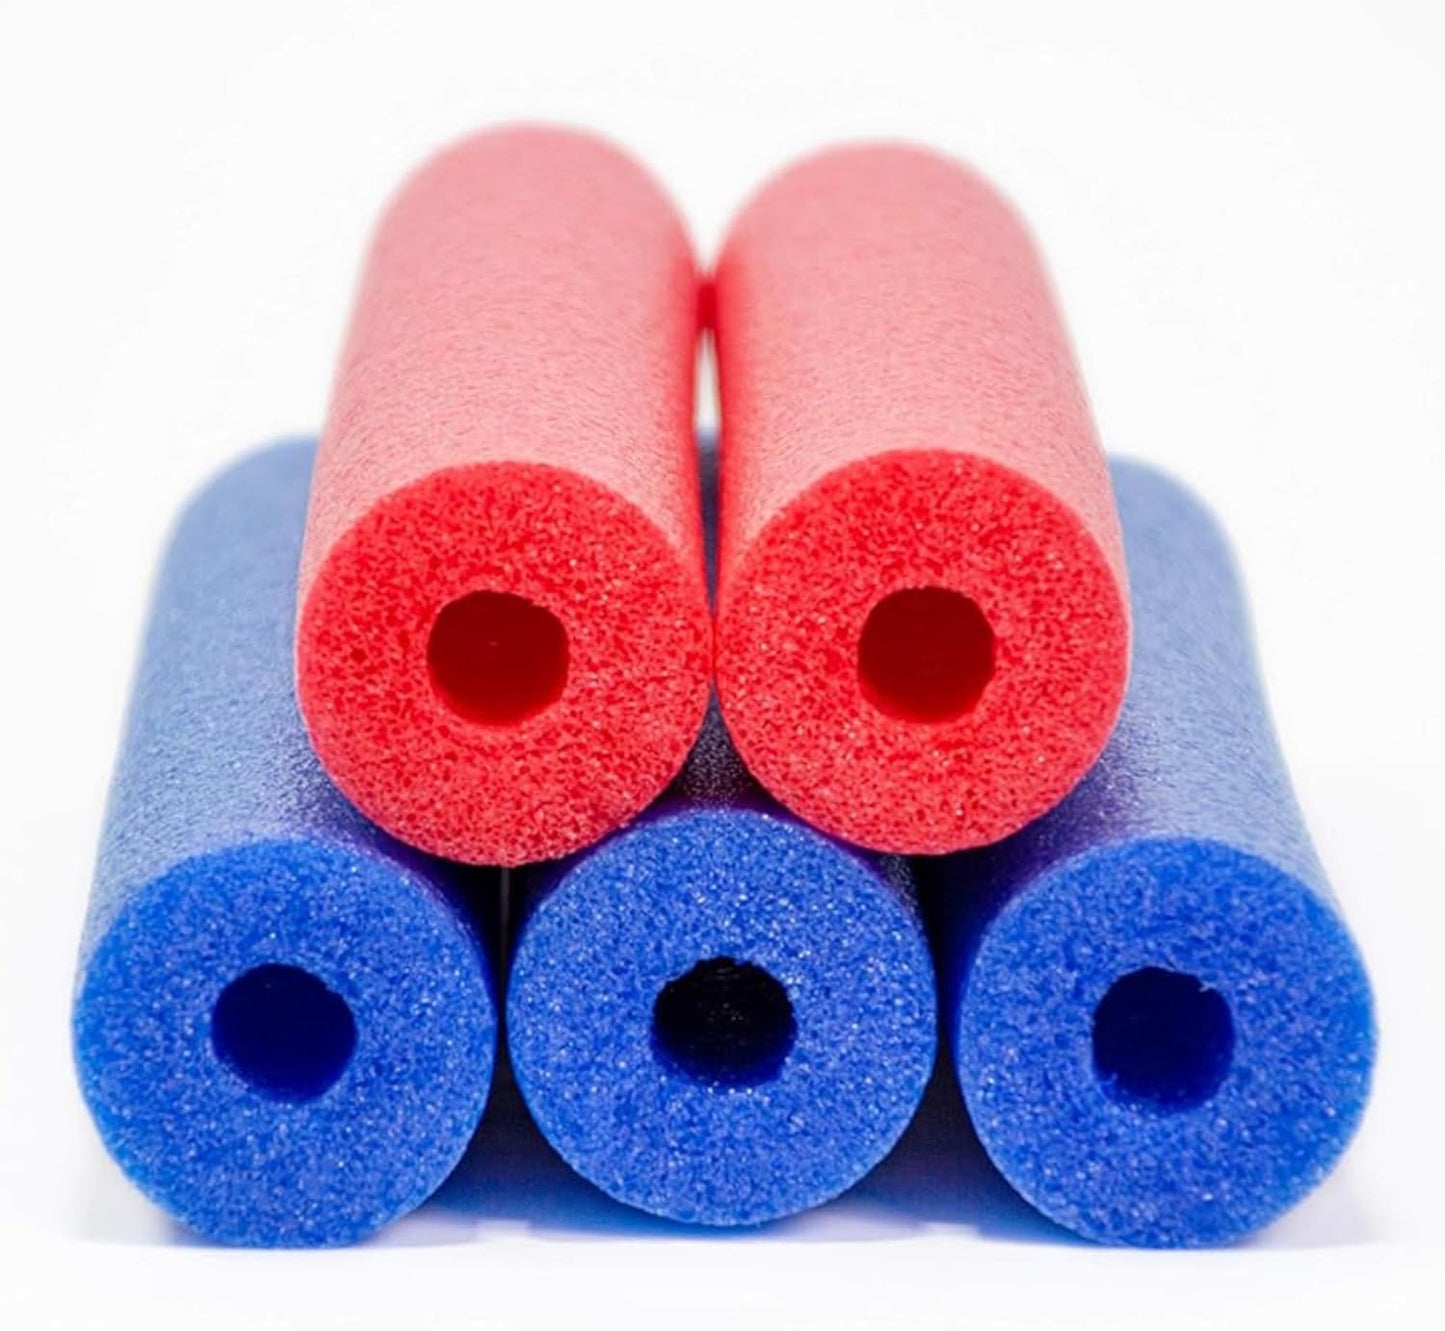 Pool Noodles,  5 Pack of 52 Inch Hollow Foam Swim Noodles, Bright Foam Noodles for Swimming, Floating and Craft Projects